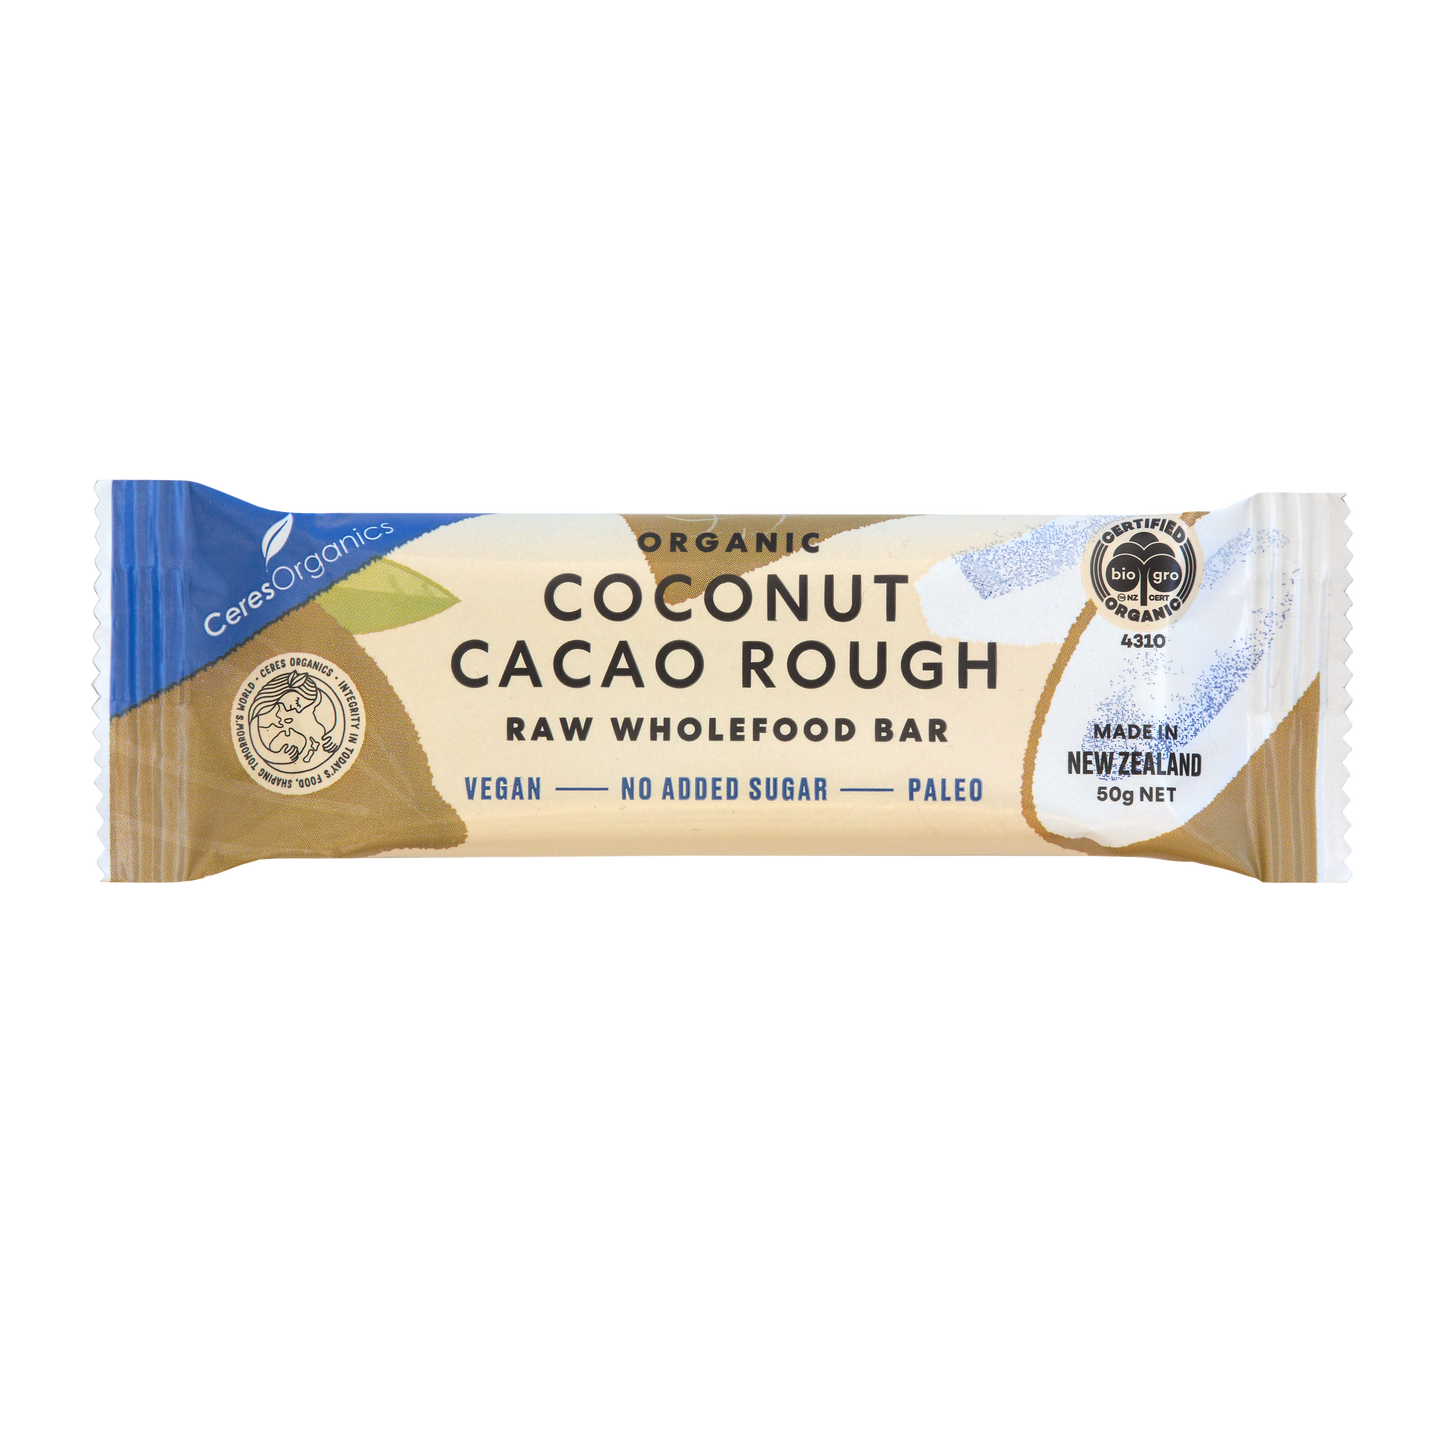 Coconut Cacao Rough Raw Wholefood Bar - 50g